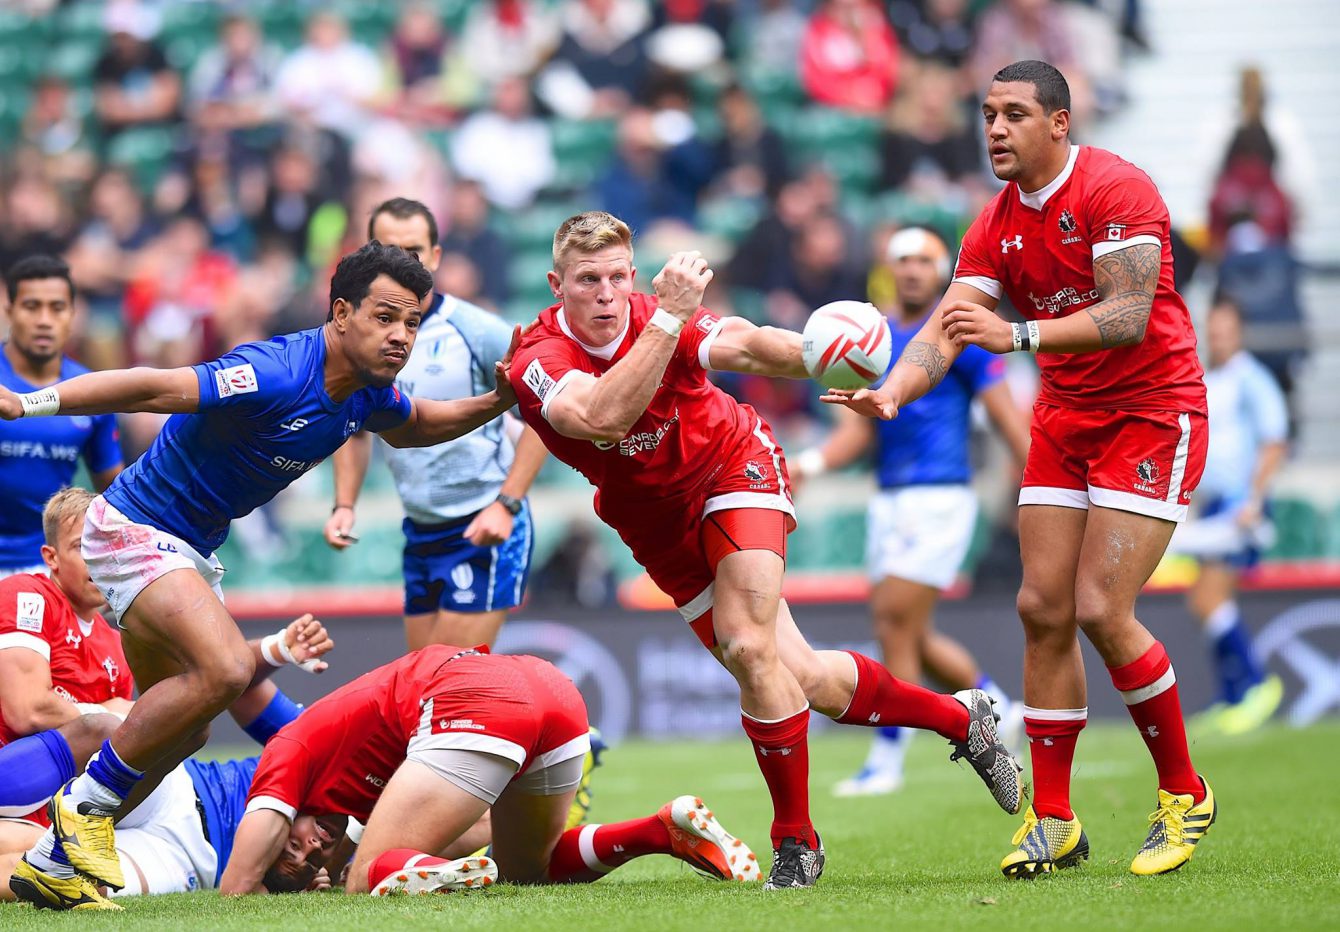 John Moonlight makes a pass to his team in a match against Samoa at London Sevens 2016 (Photo: Rugby Canada).